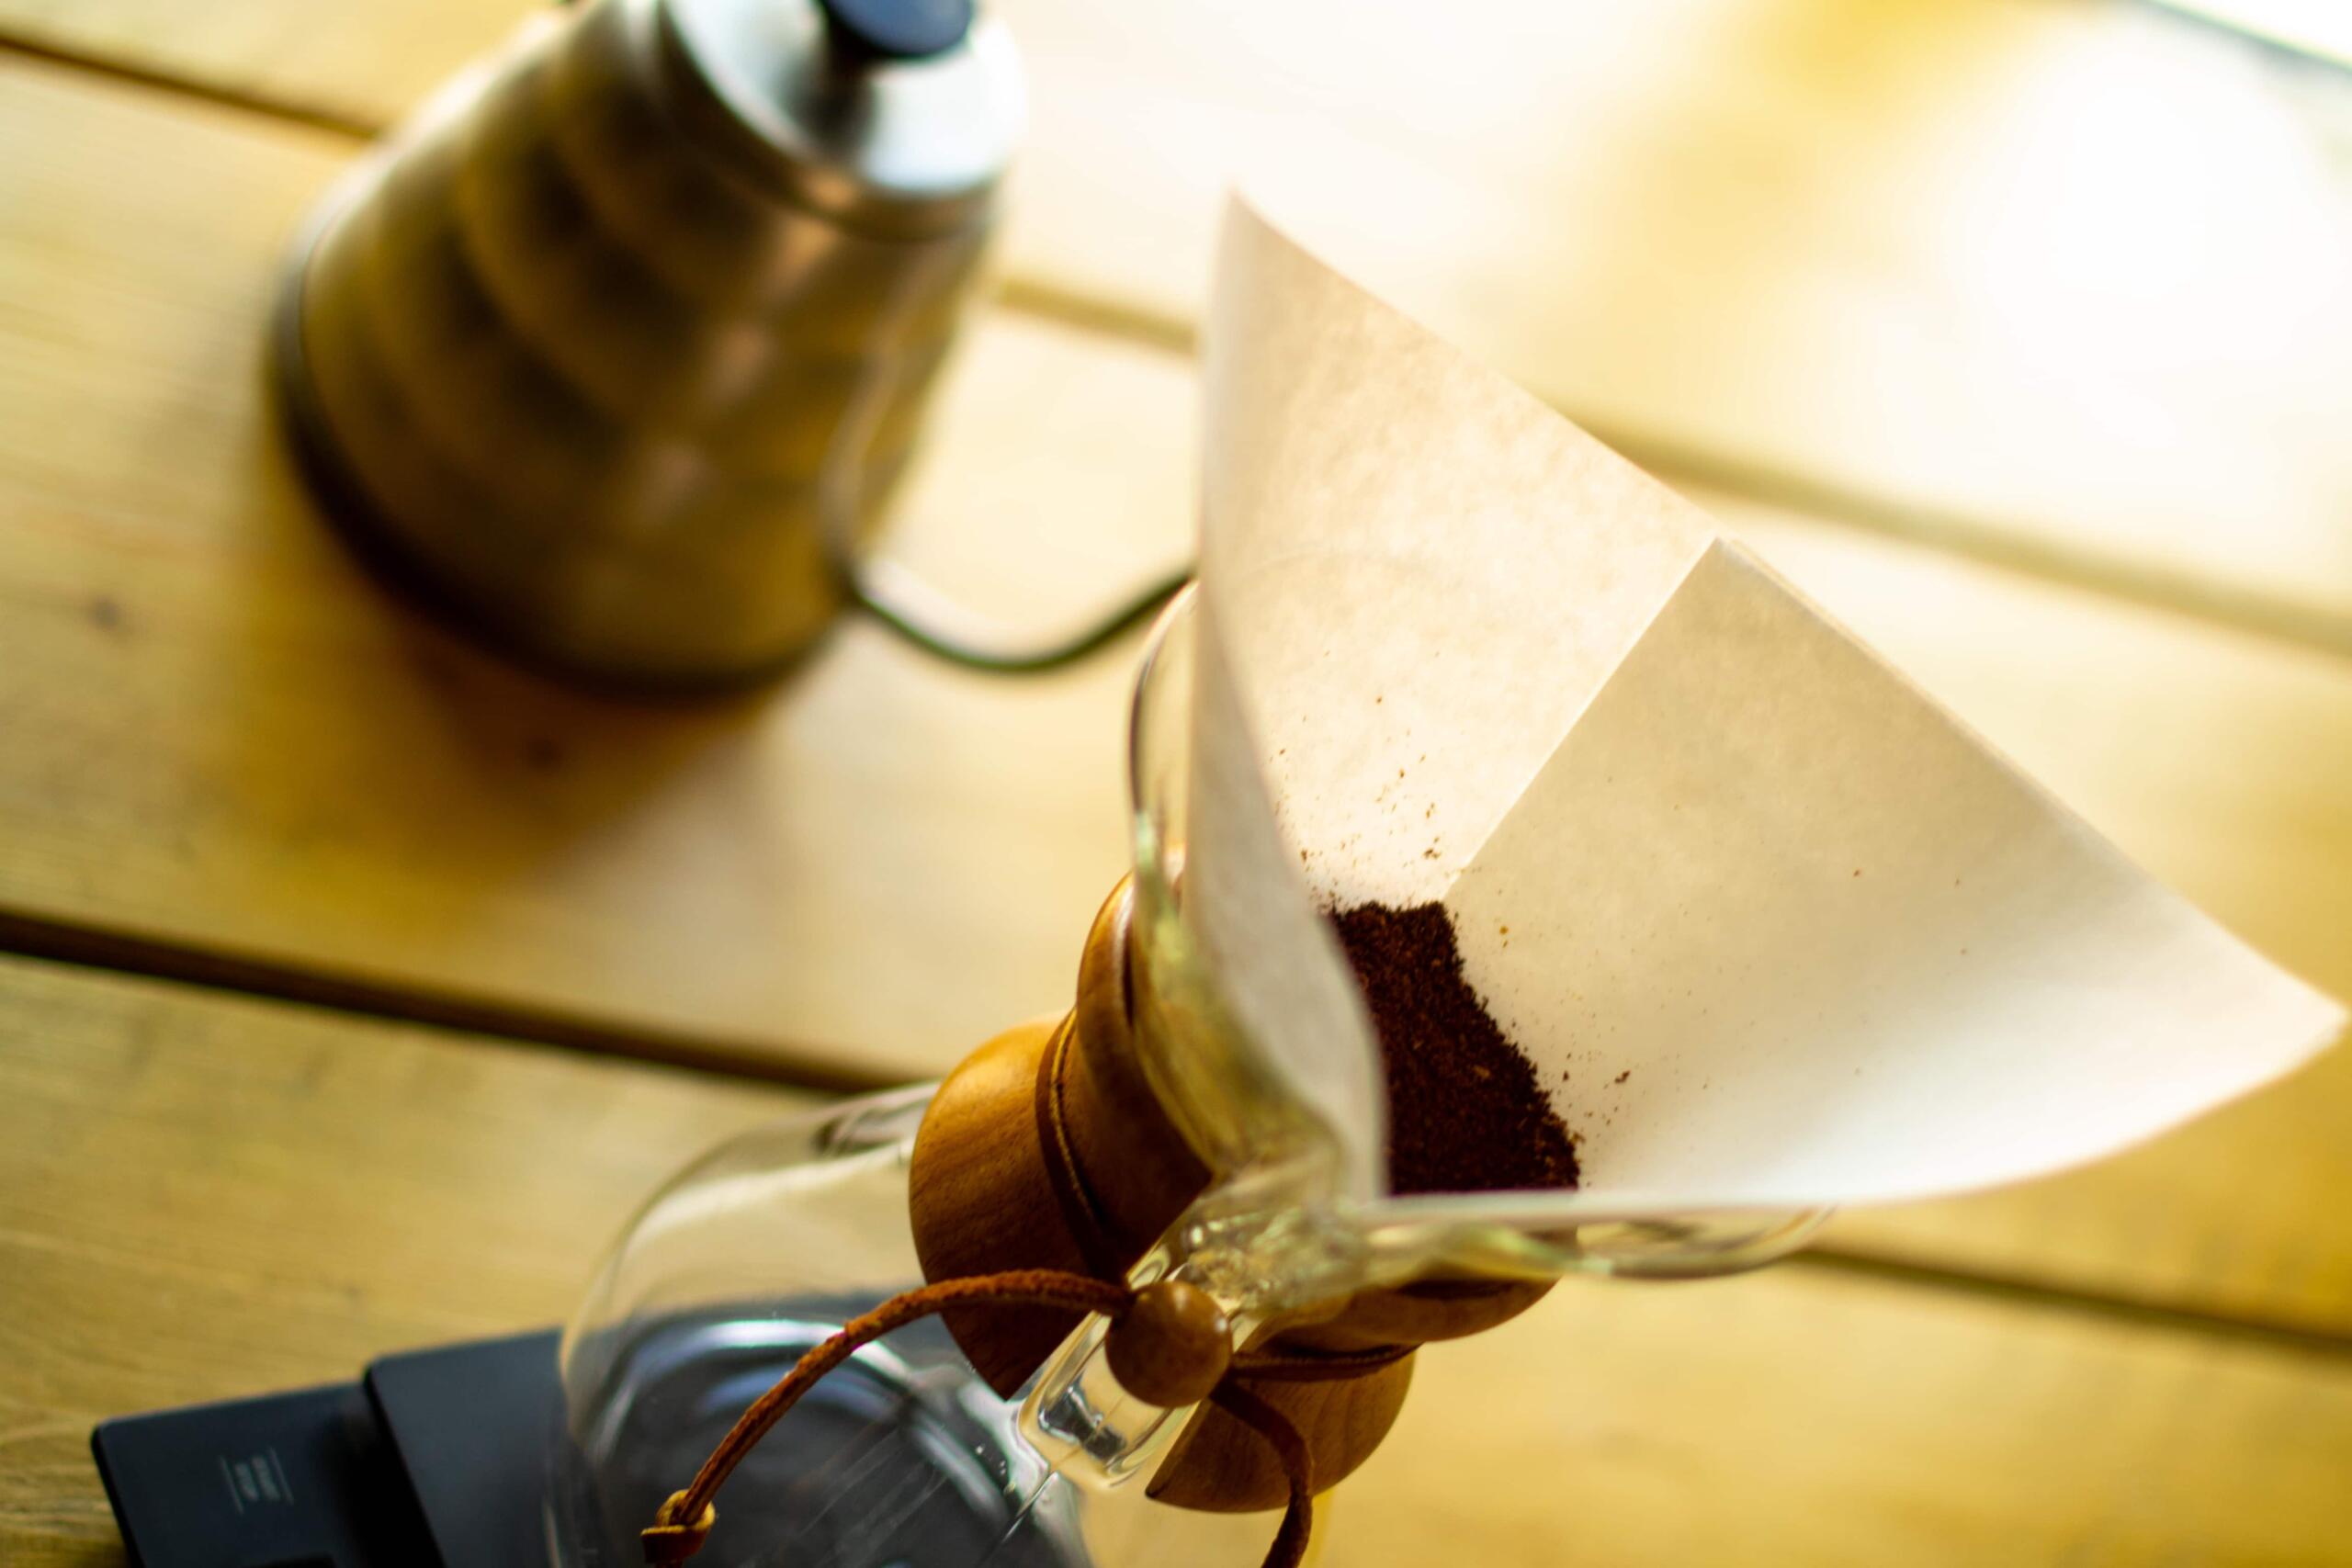 Chemex with grounds and swan neck kettle